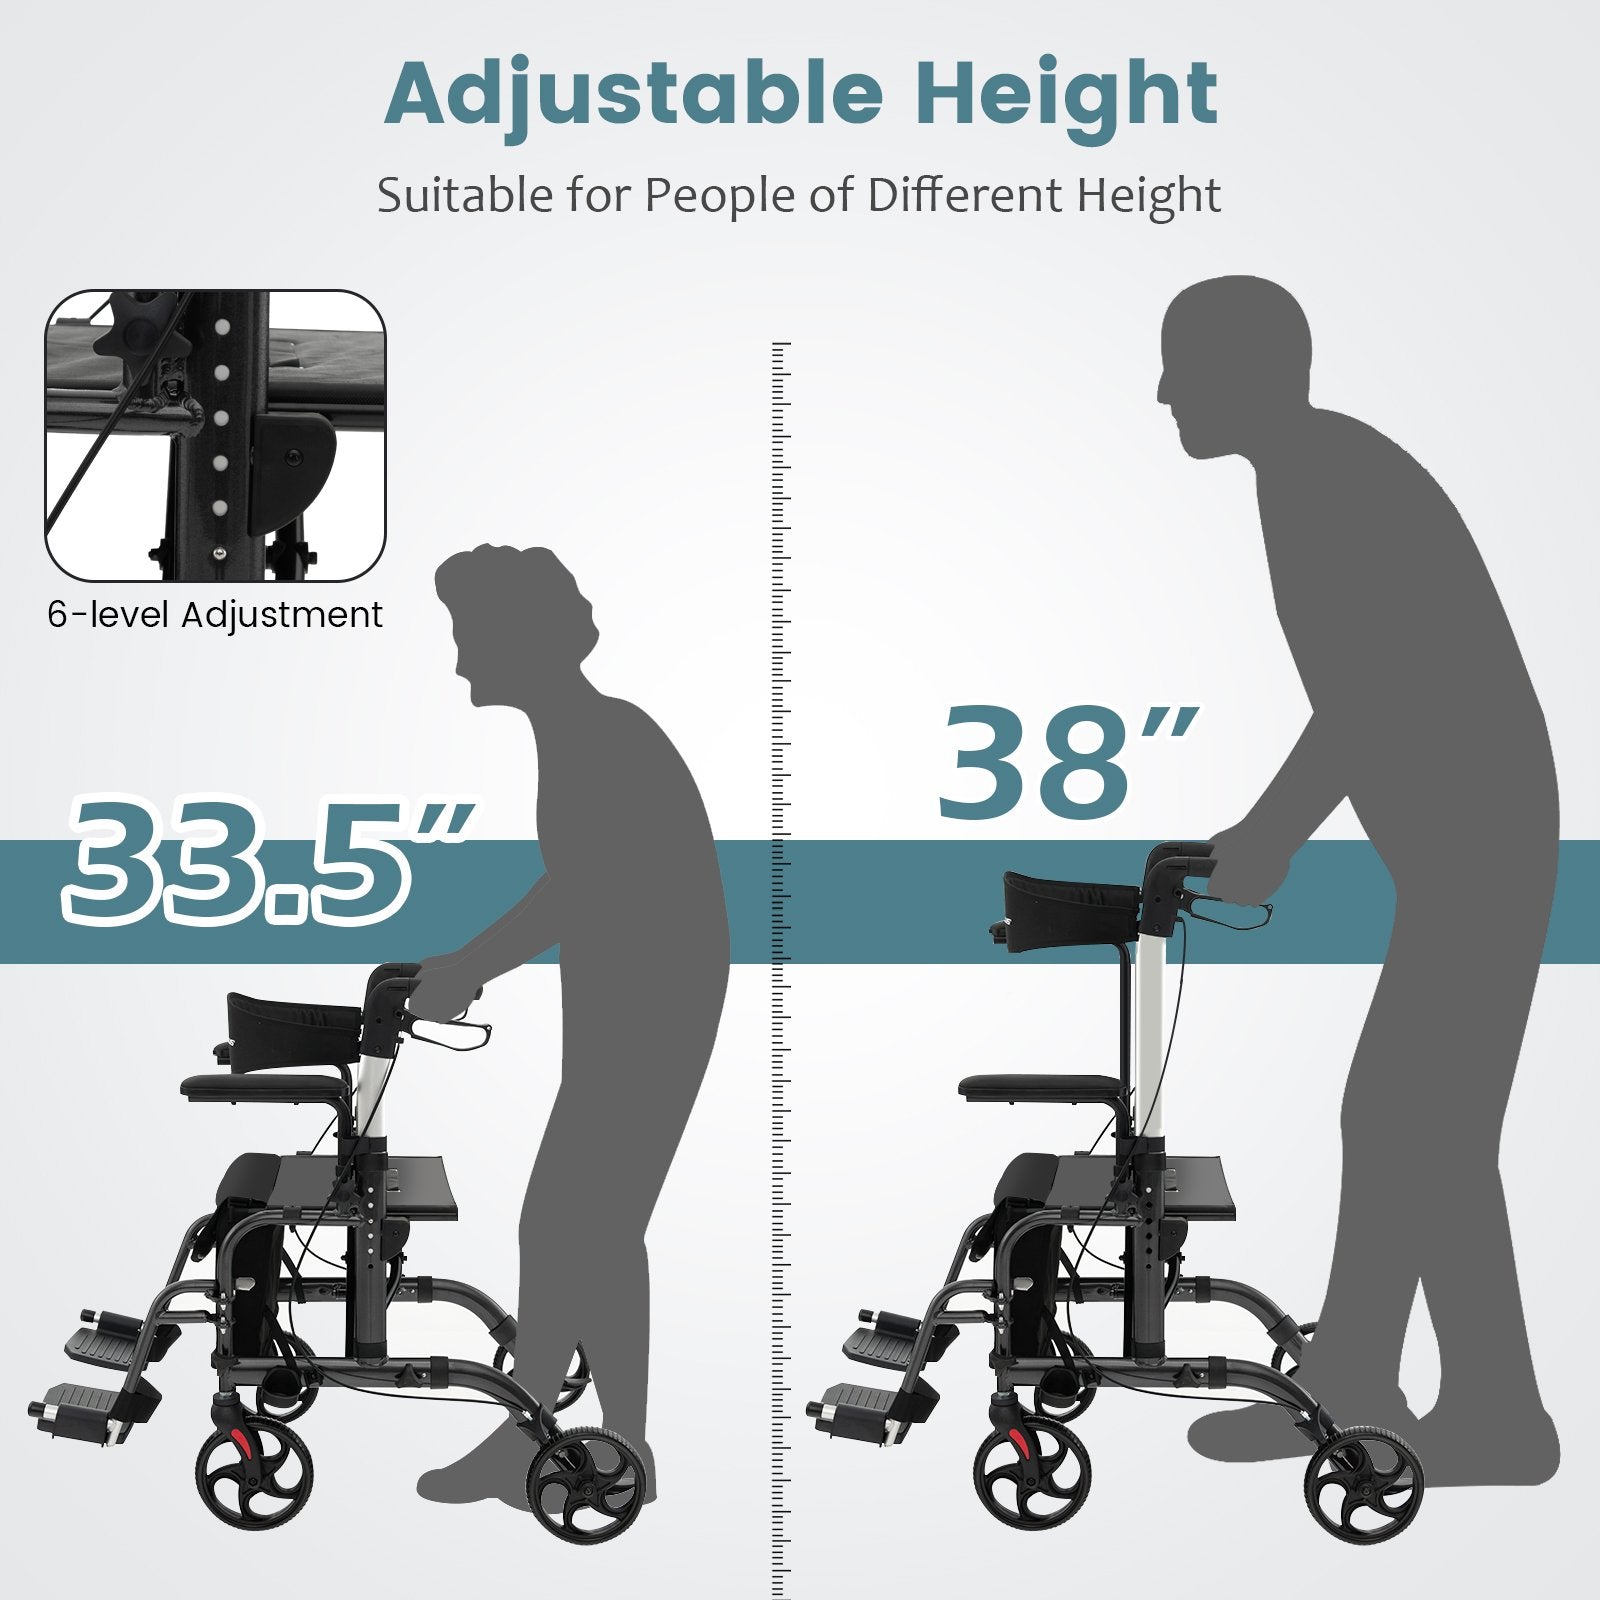 Folding Rollator Walker with Seat and Wheels Supports up to 300 lbs, Black at Gallery Canada